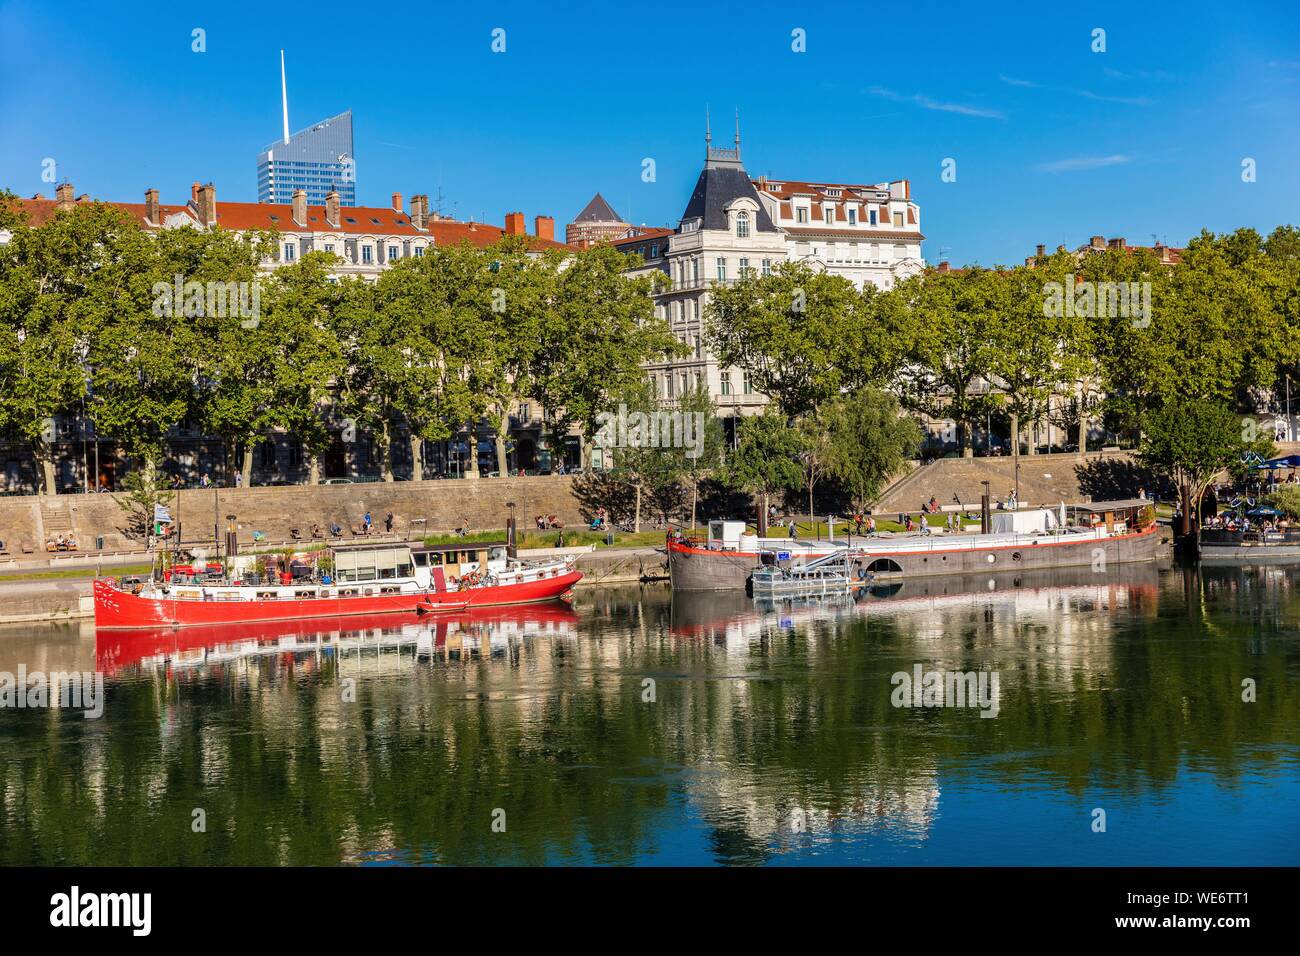 France, Rhone, Lyon, historical site listed as World Heritage by UNESCO, dock Général Sarrail, Rhone River banks with a view of the Incity tower and the tip of the Pencil Stock Photo